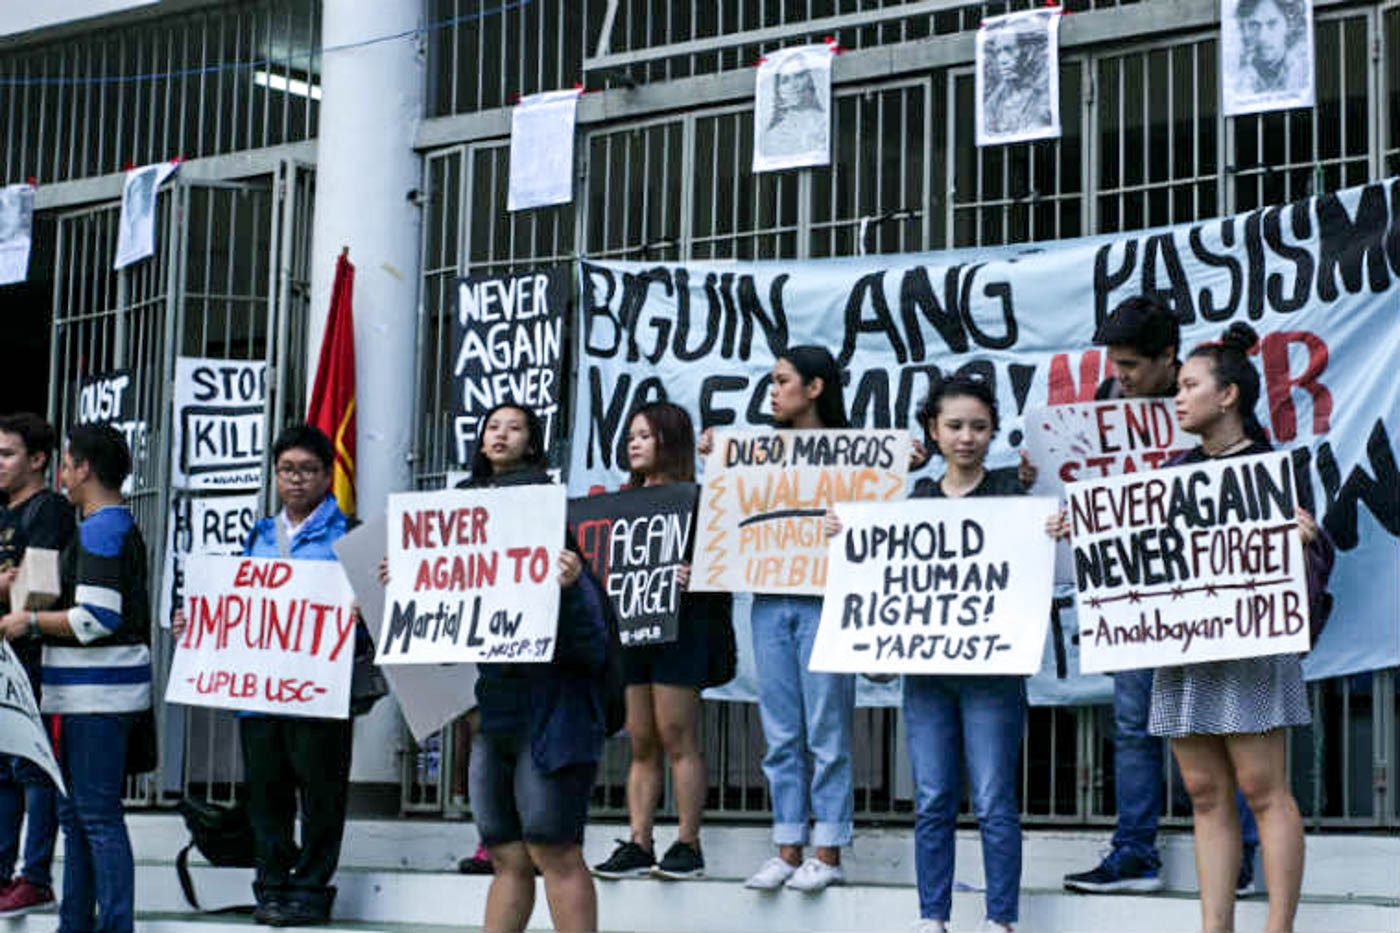 CALABARZON. UPLB students stage a protest at the Carabao Park at the University of the Philippines - Los Baños campus. Photo by Neren Bartolay/Rappler 